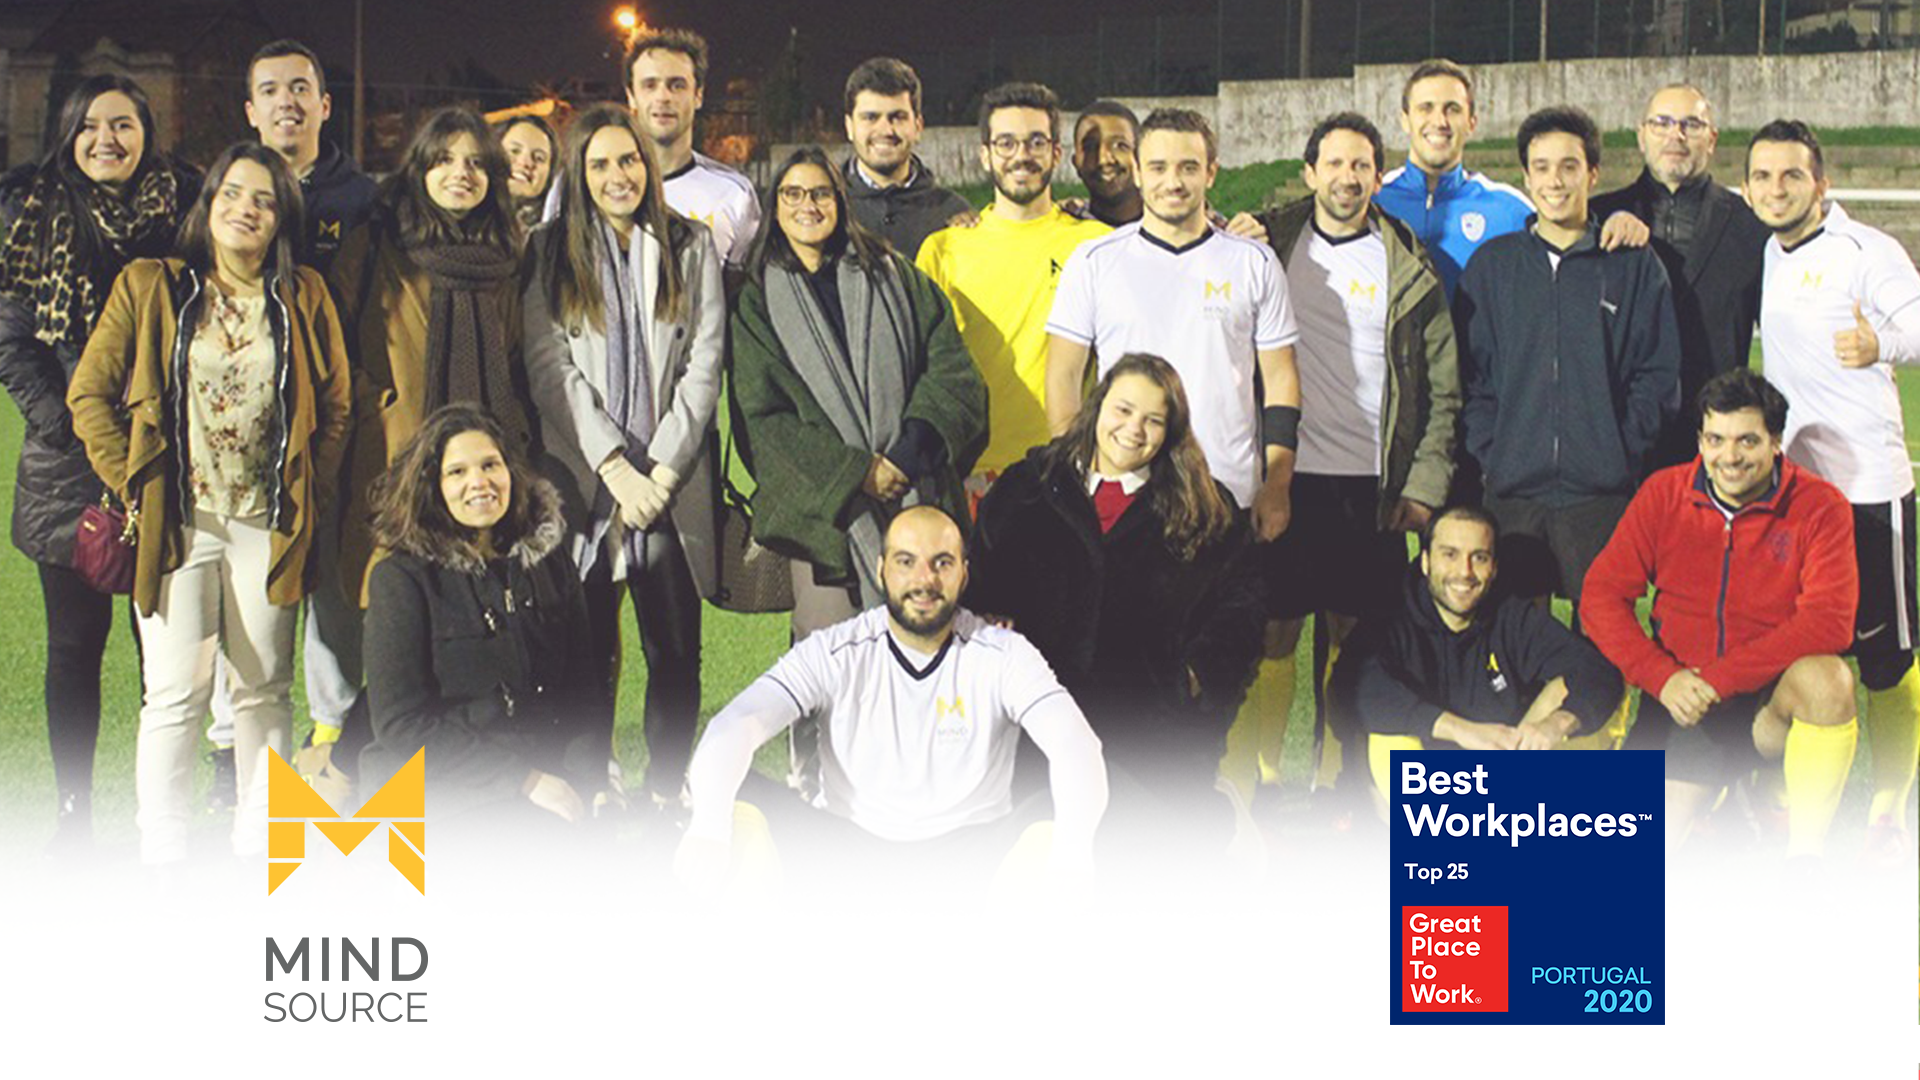 Best Workplaces in Portugal 2020 | Great Place To Work Lists